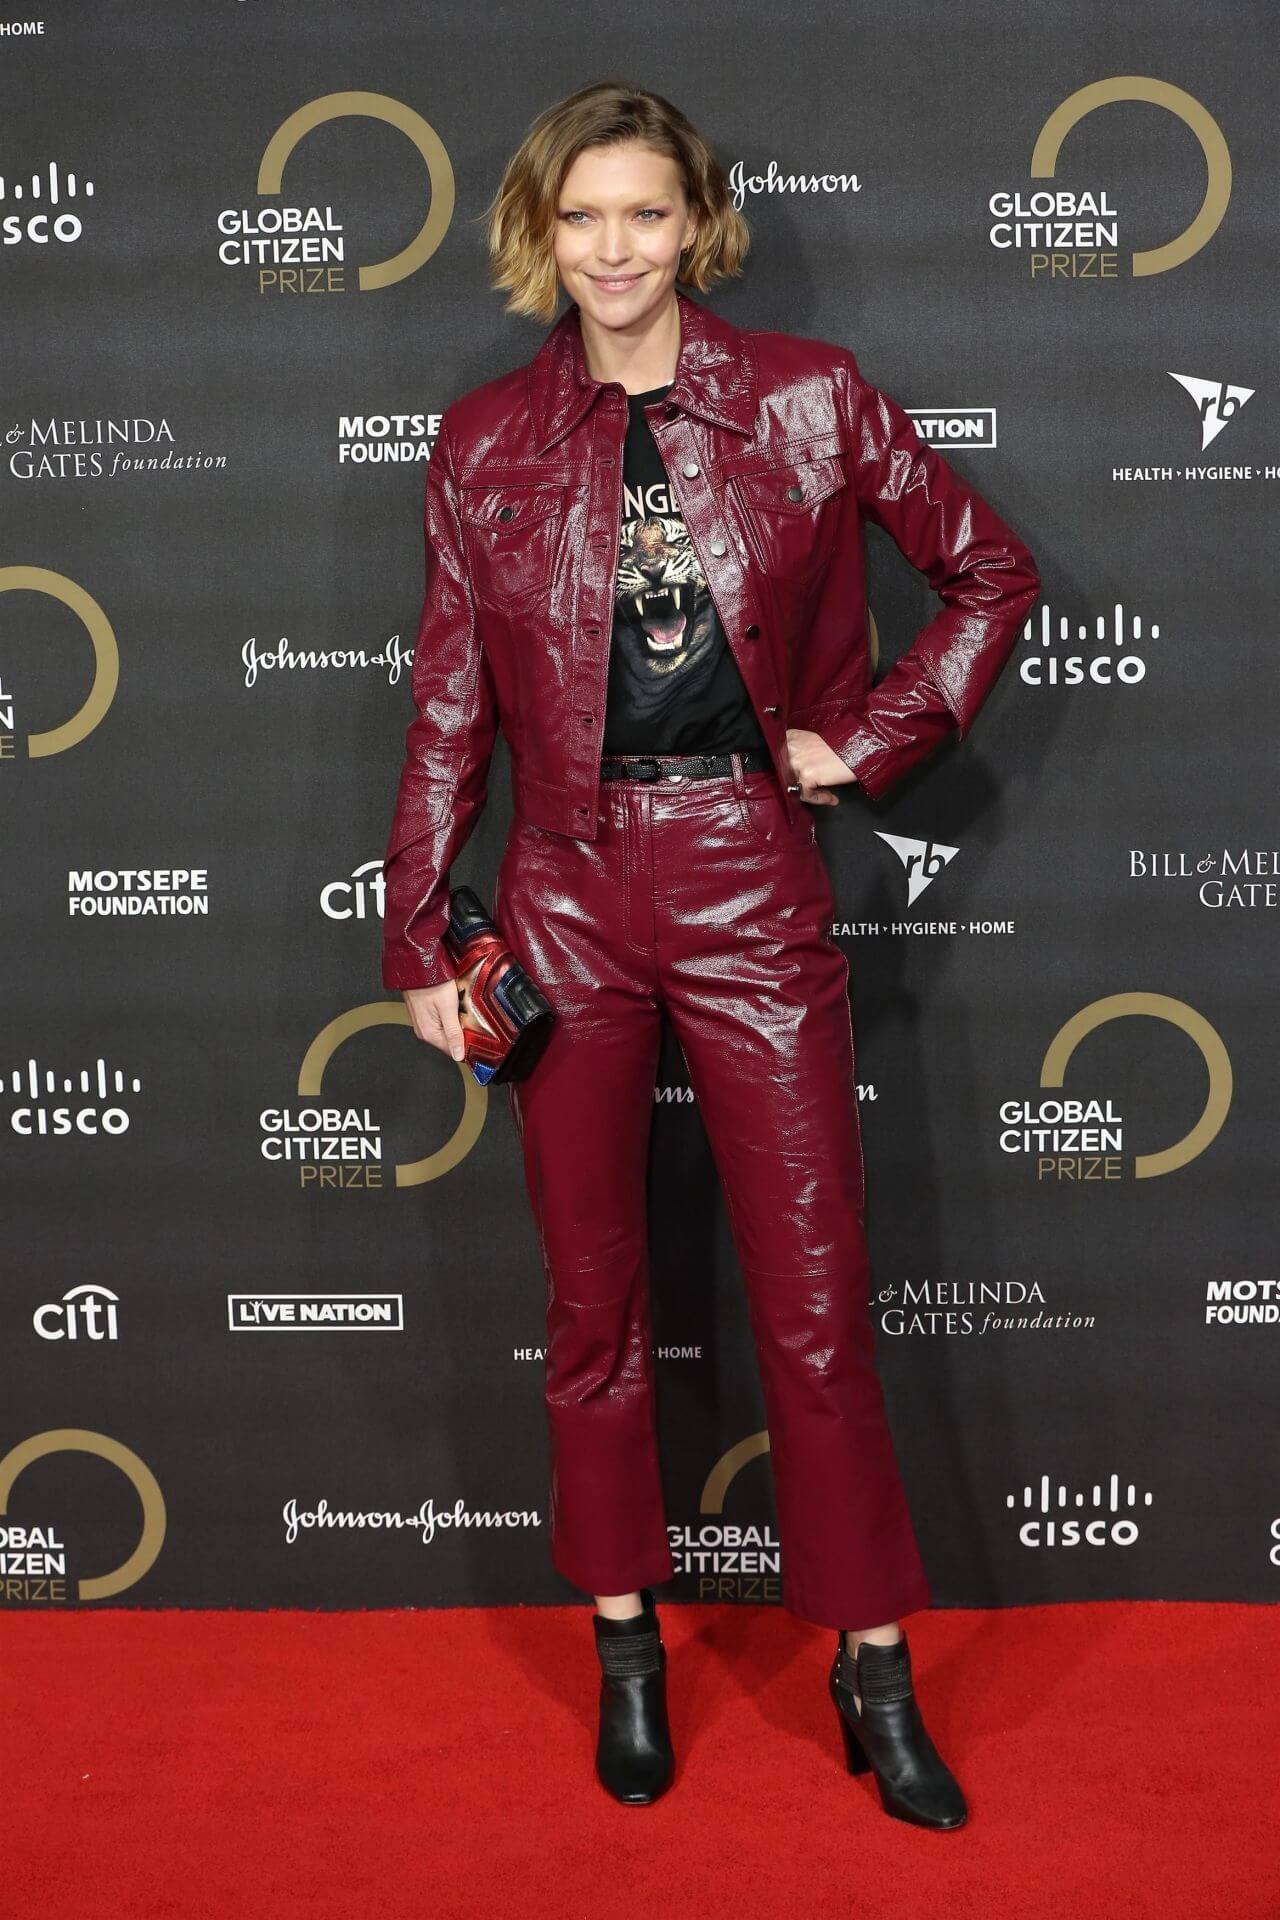 Arizona Muse In Shiny Maroon Leather Jacket & Pants With Black T-shirt At Global Citizen Prize